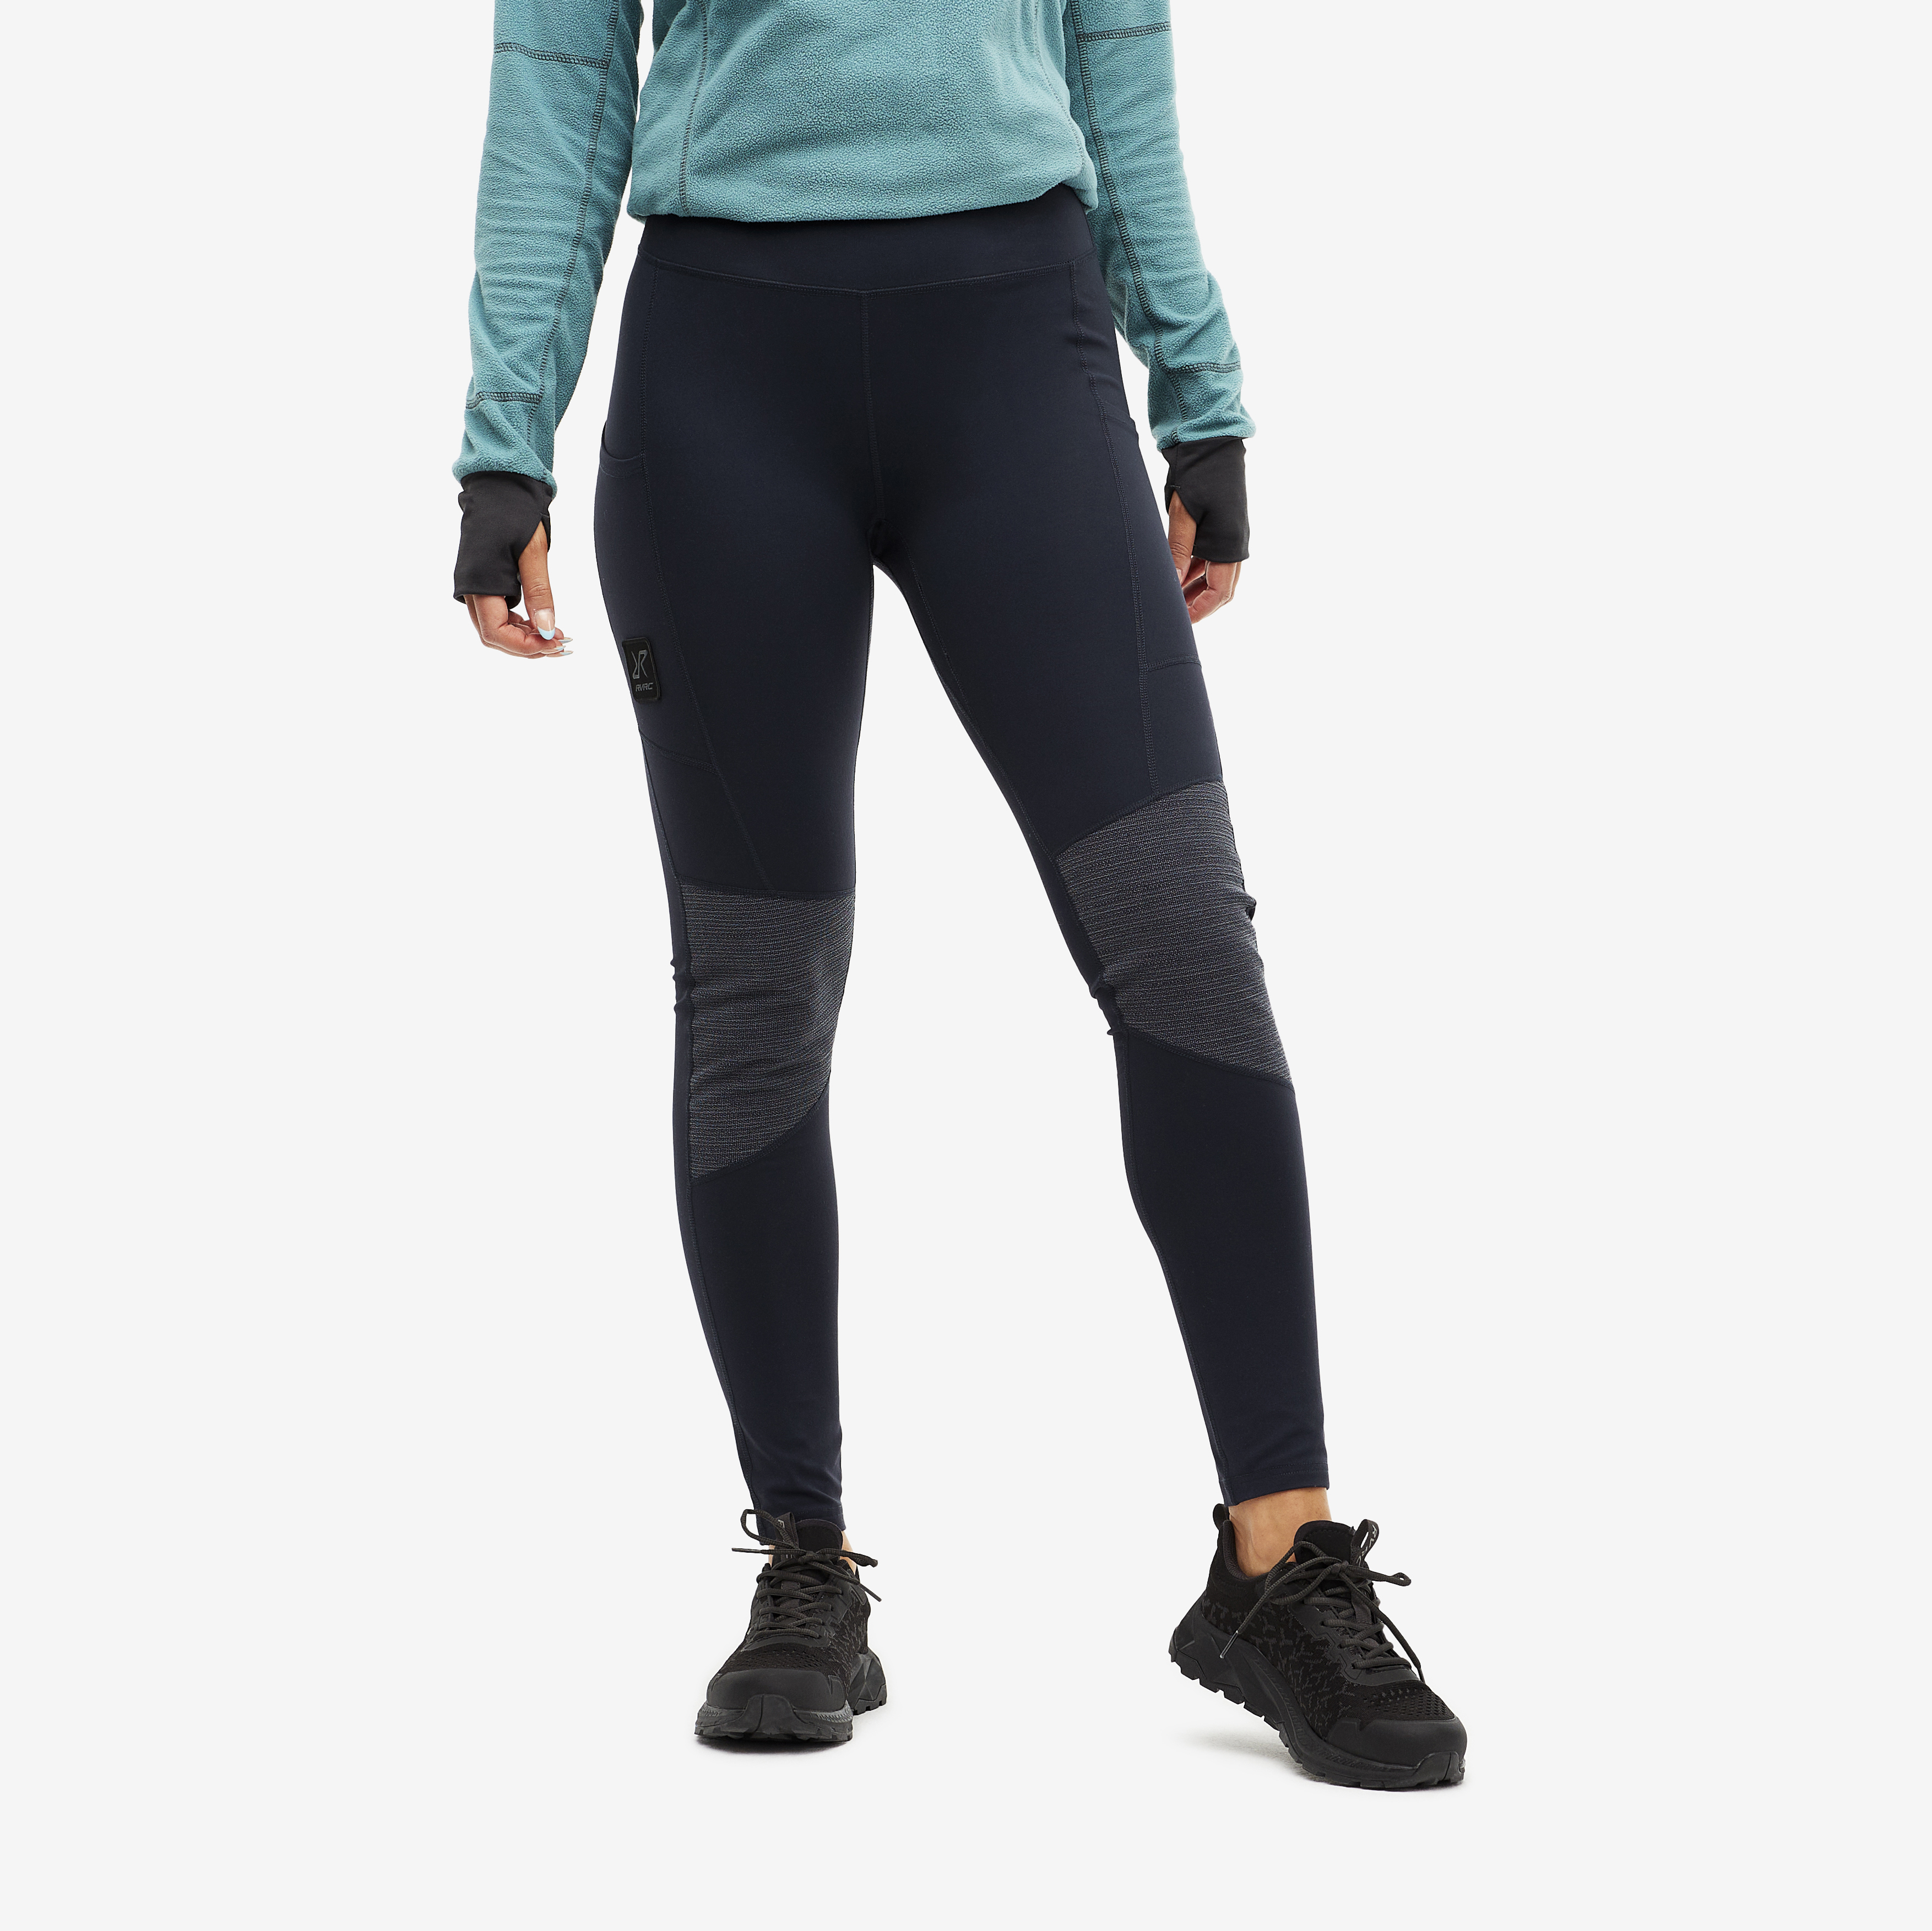 Summit Core Tights – Dam – Peacemaker Blue Storlek:XL – Outdoor Tights